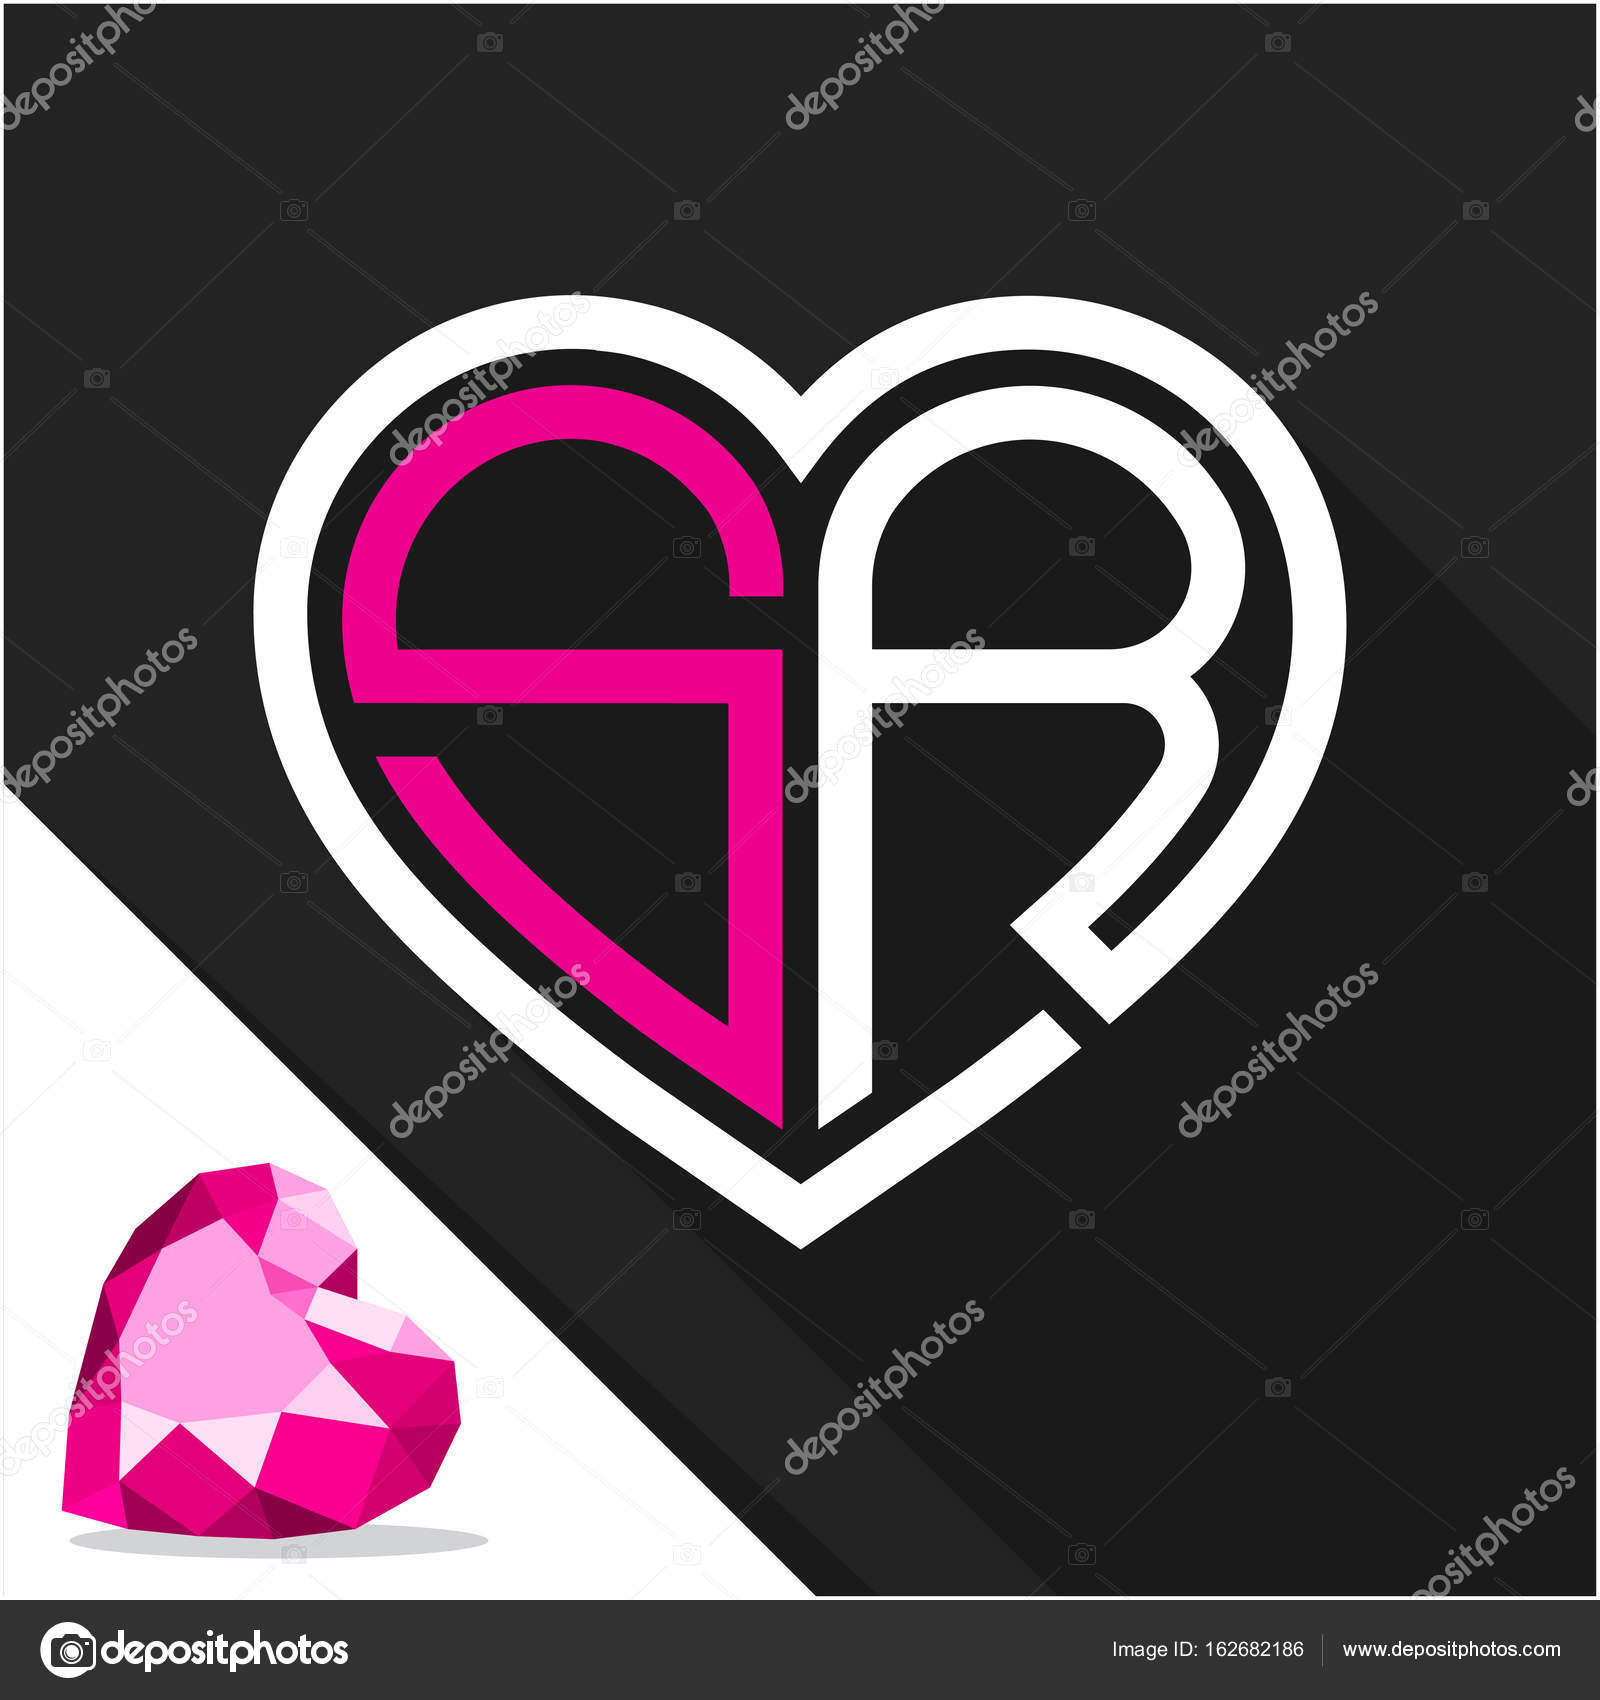 Icon logo heart shape with combination of initials letter S & R ...